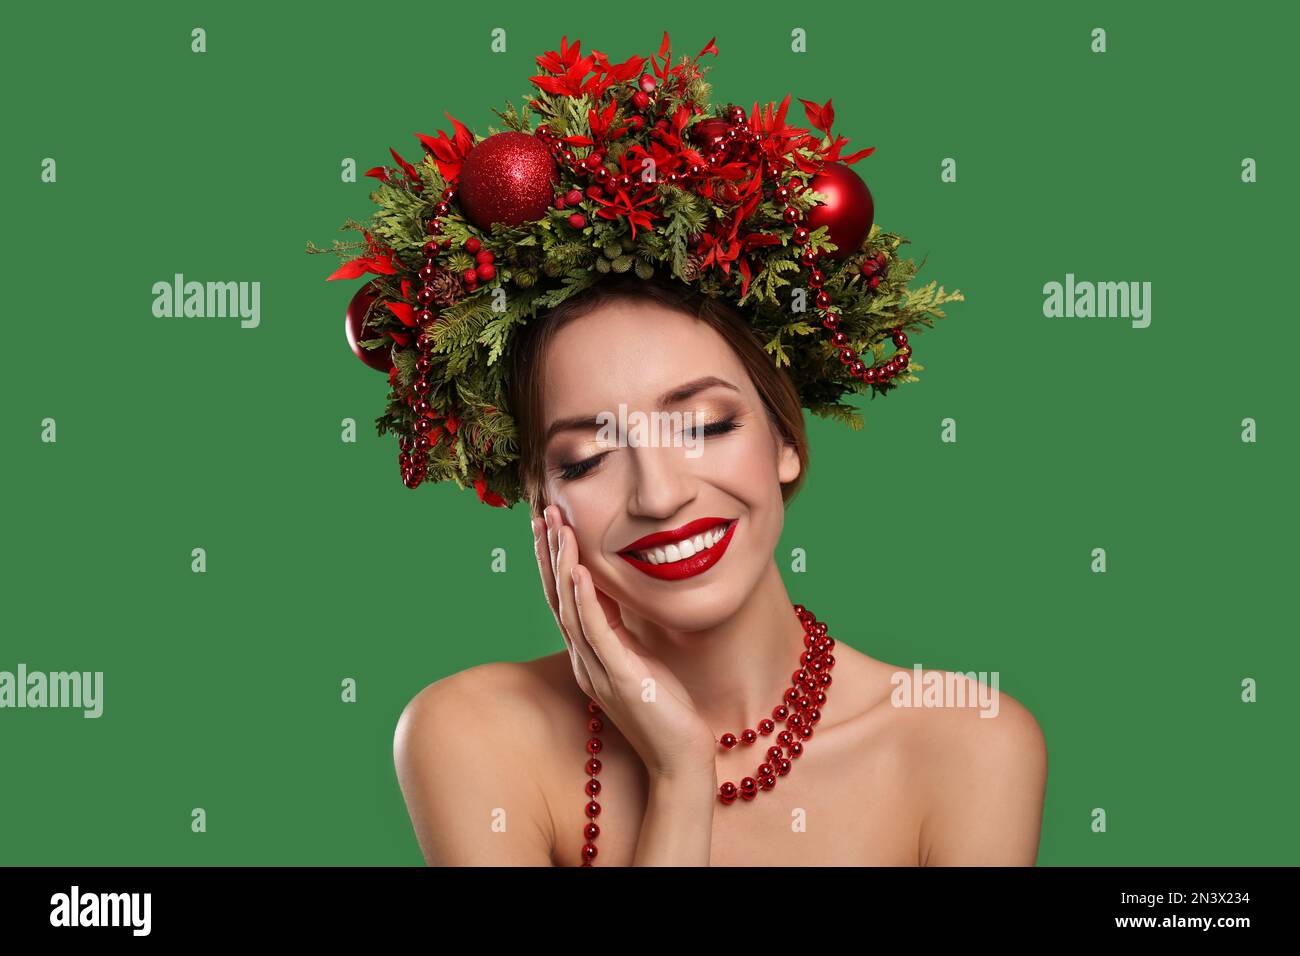 Beautiful young woman wearing Christmas wreath on green background Stock Photo